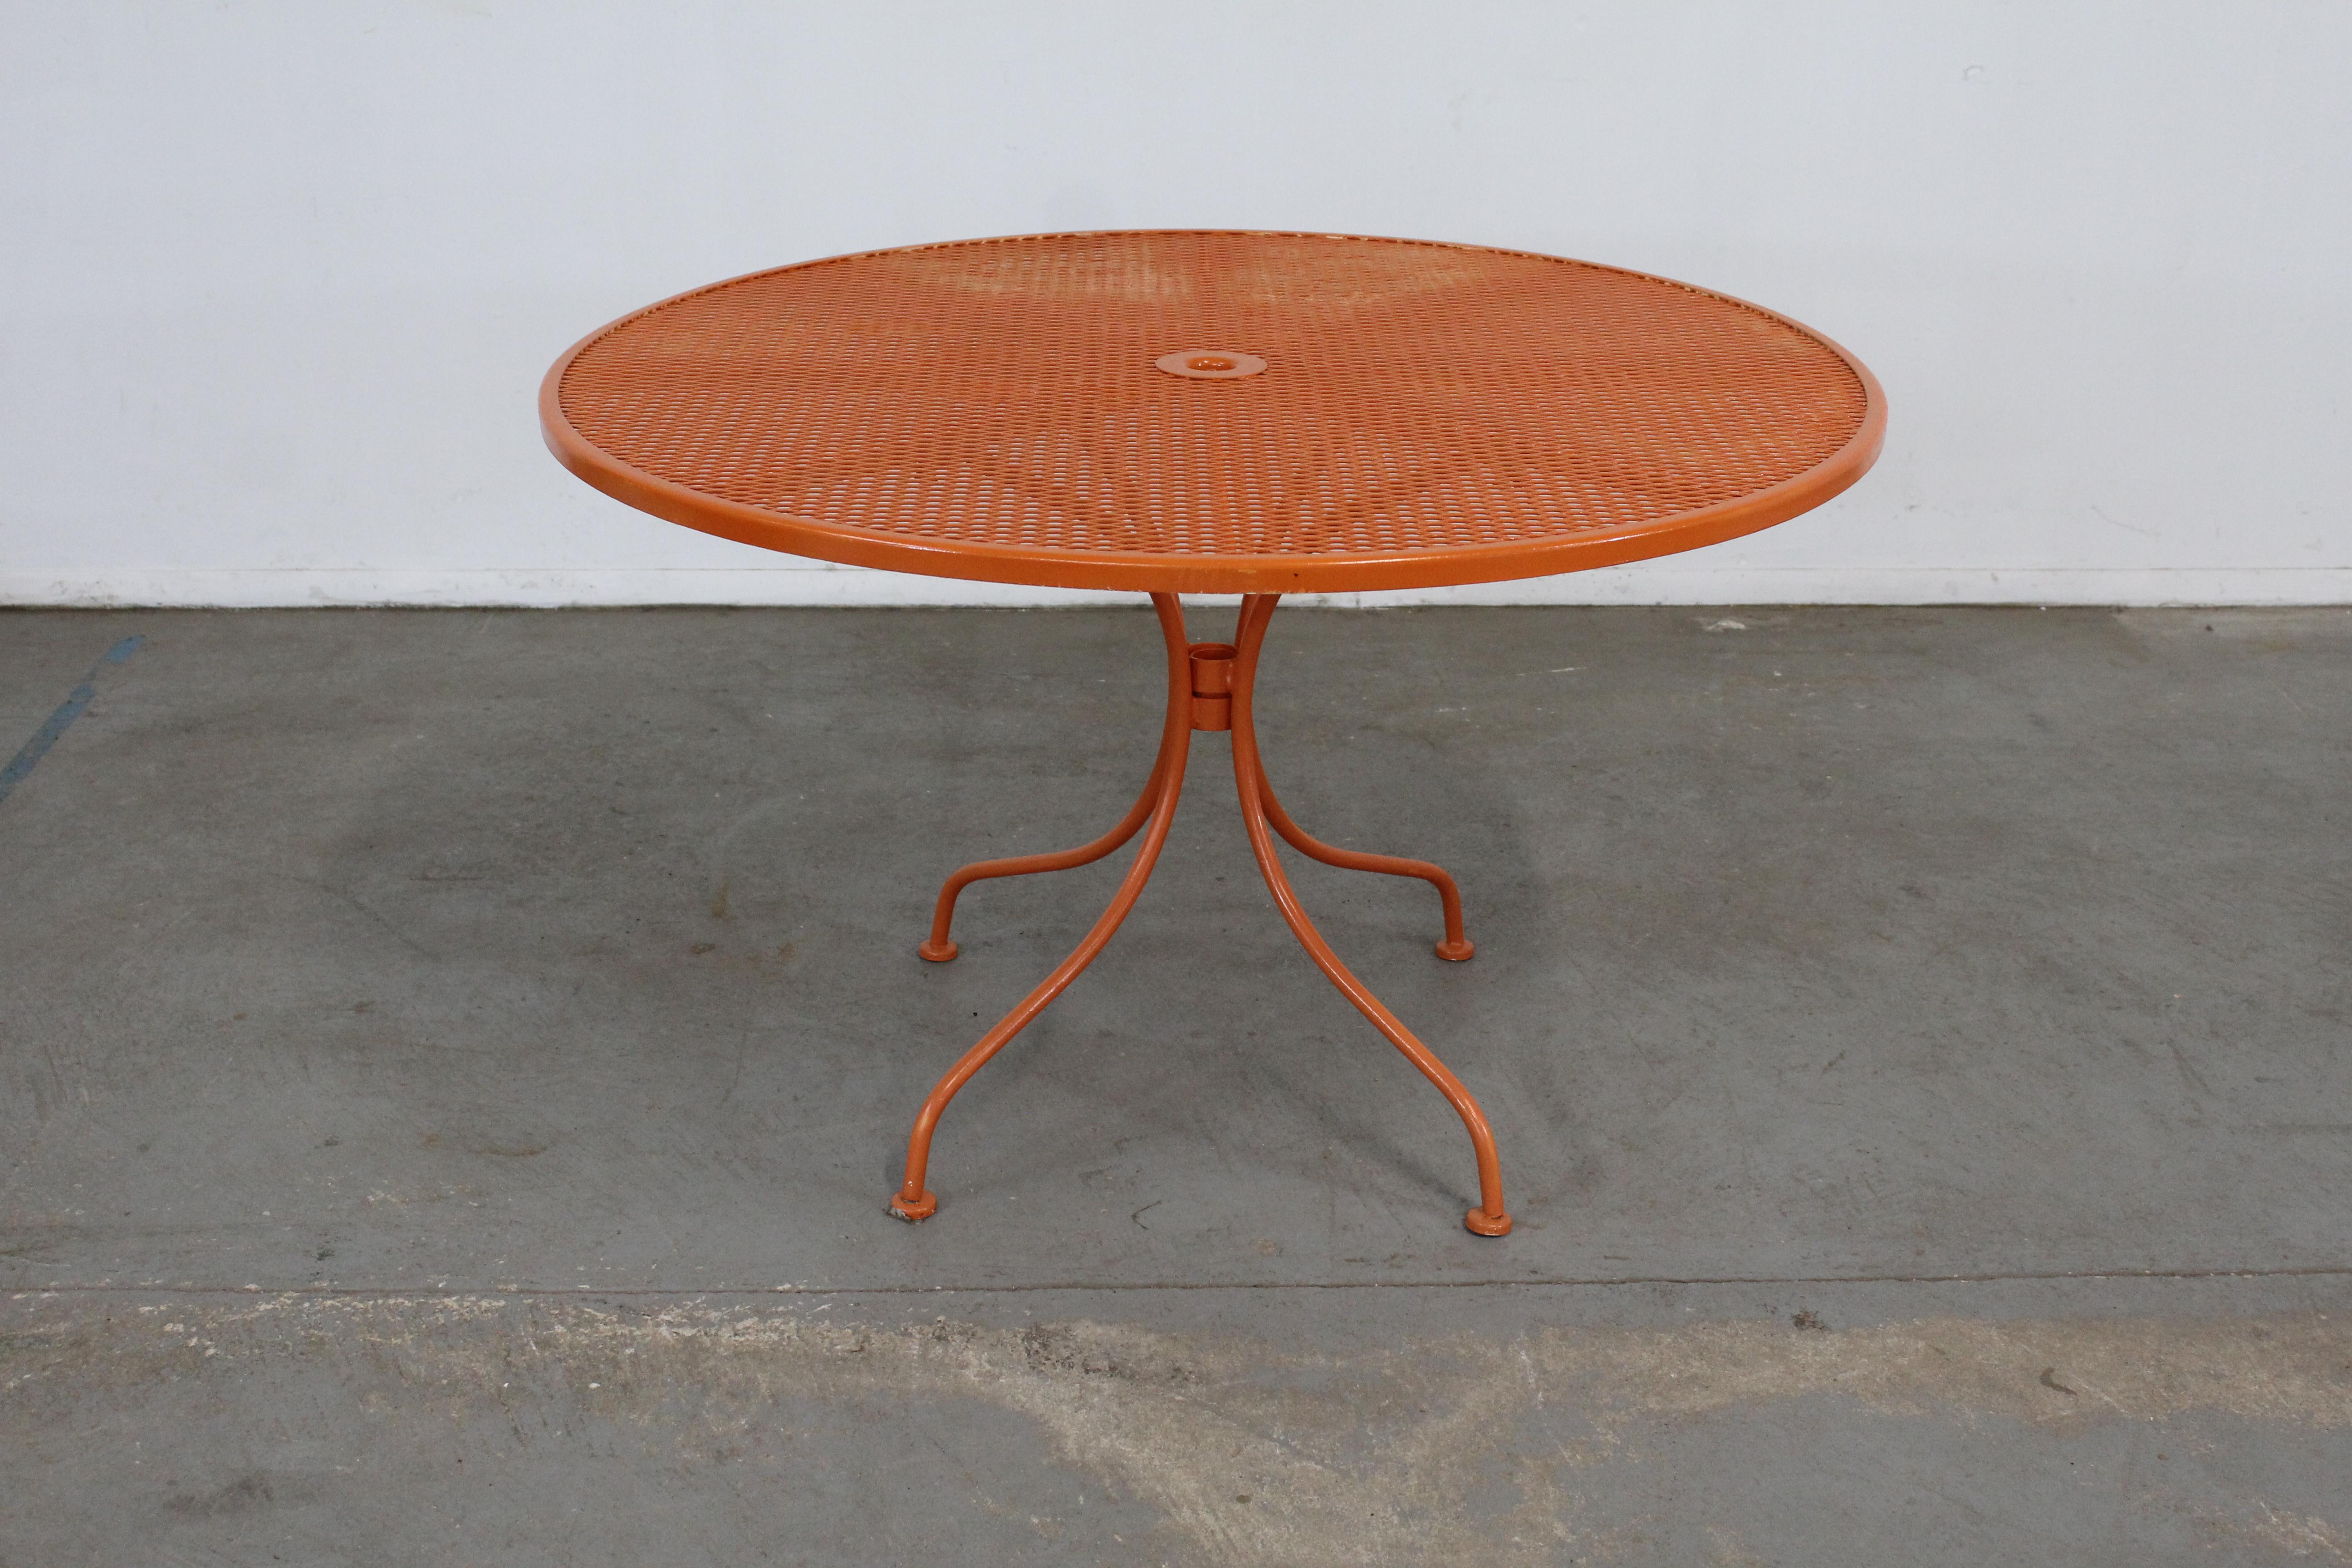 Mid-Century Modern Woodard Outdoor Round Dining Table
Offered is a mid-century outdoor iron Woodard round dining table. Features Orange paint and woven wrought iron. The table is structurally sound in good condition and can accommodate up to 4